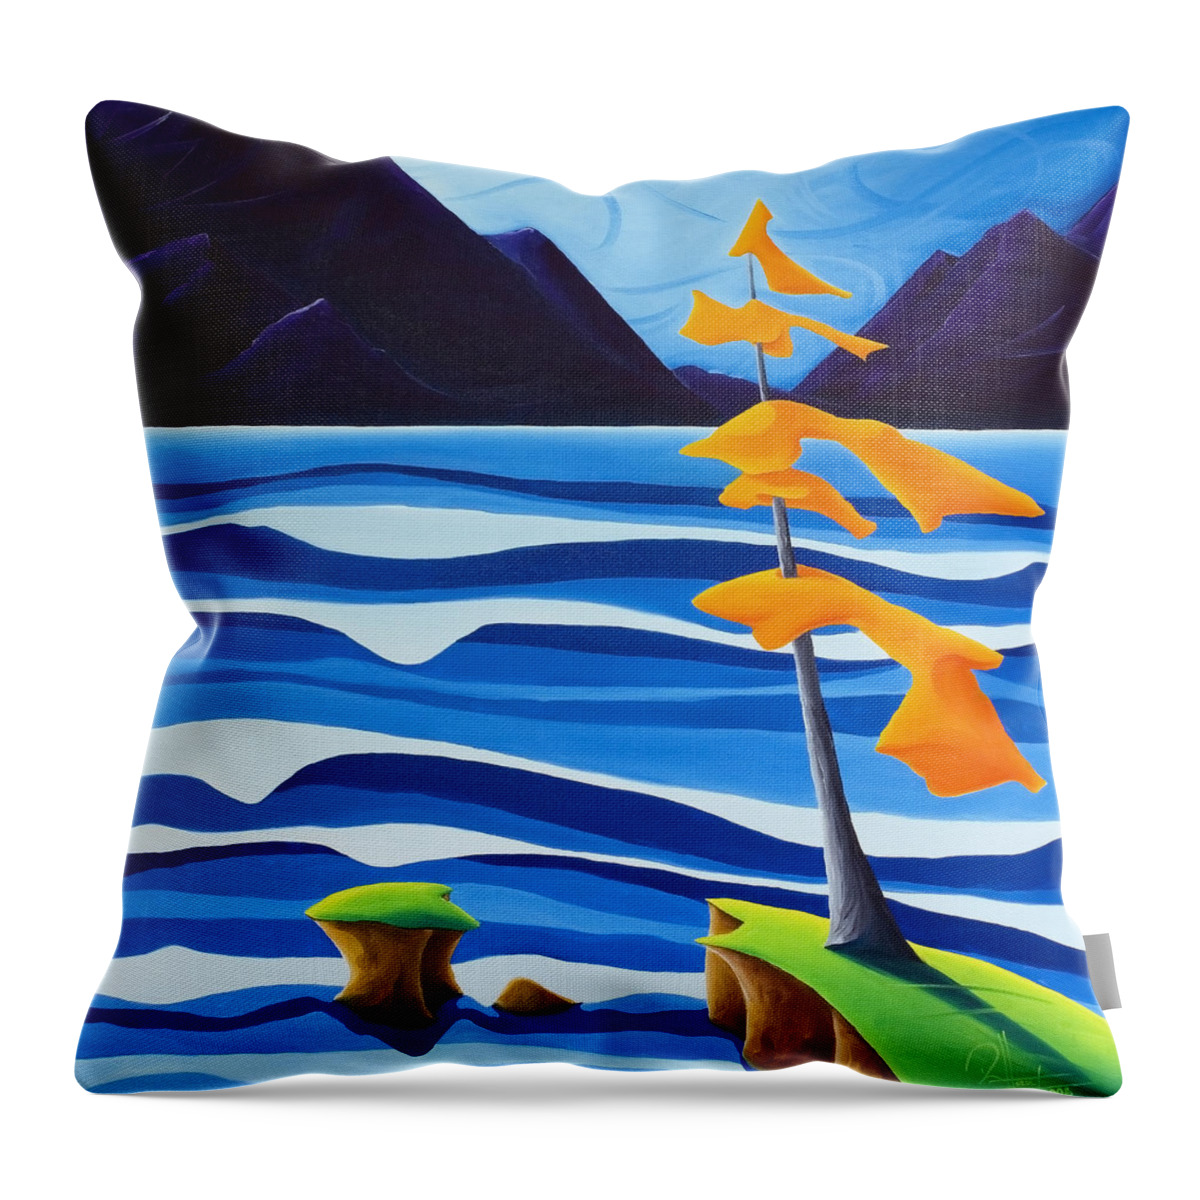 Landscape Throw Pillow featuring the painting Waves Of Emotion by Richard Hoedl